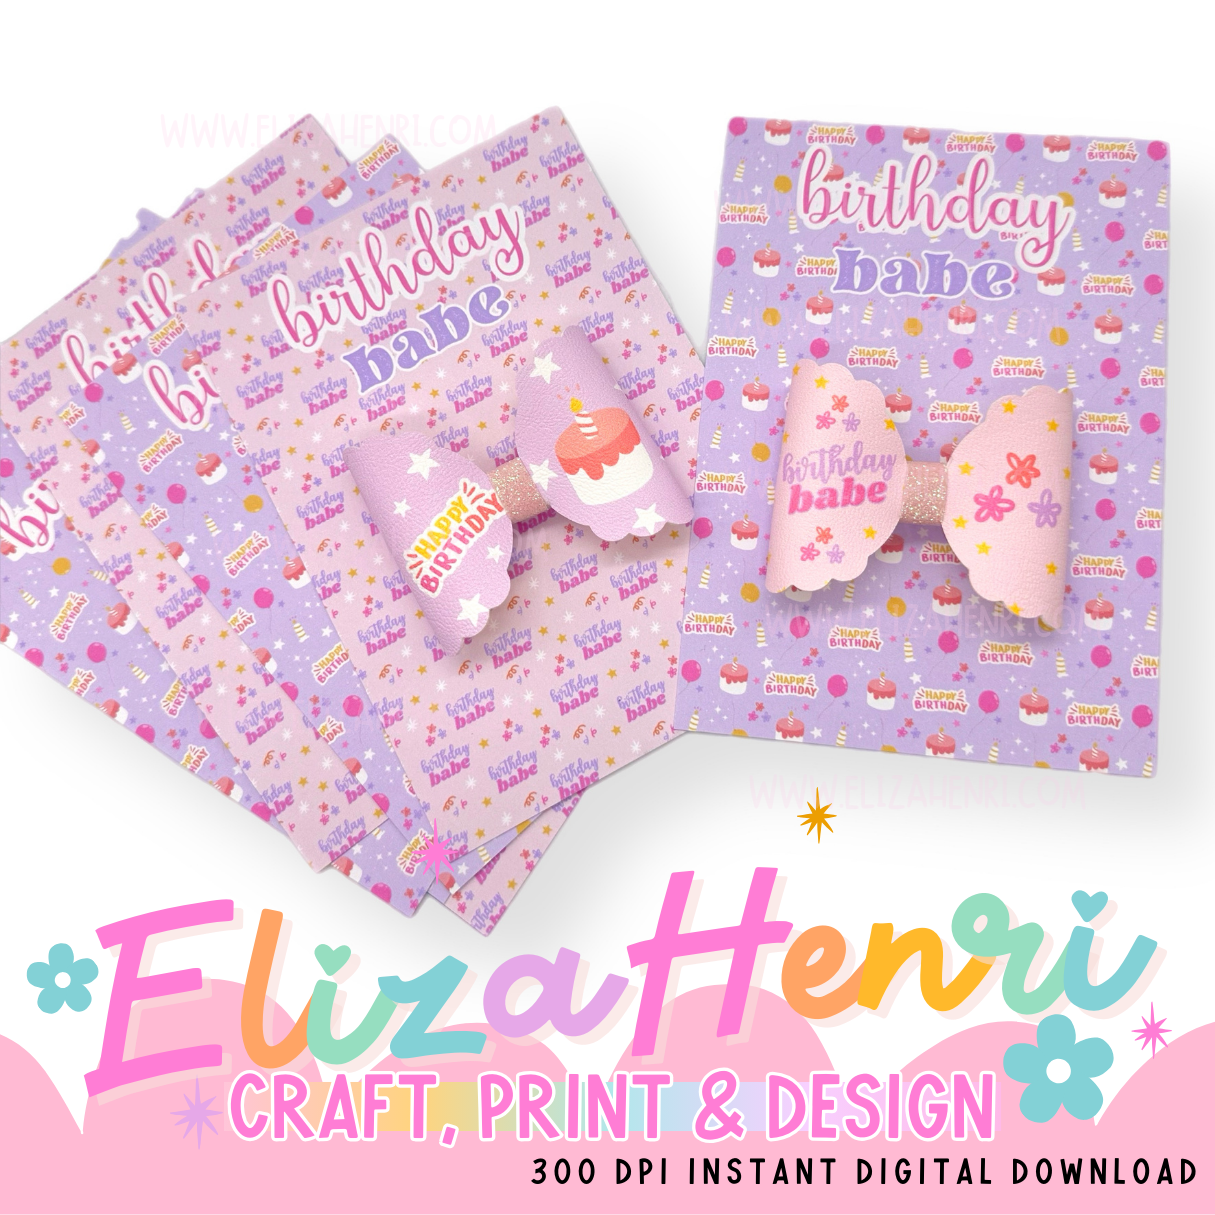 Birthday Babe Pink & Lilac Bow Cards A6 Size- Digital Download- 2 Designs